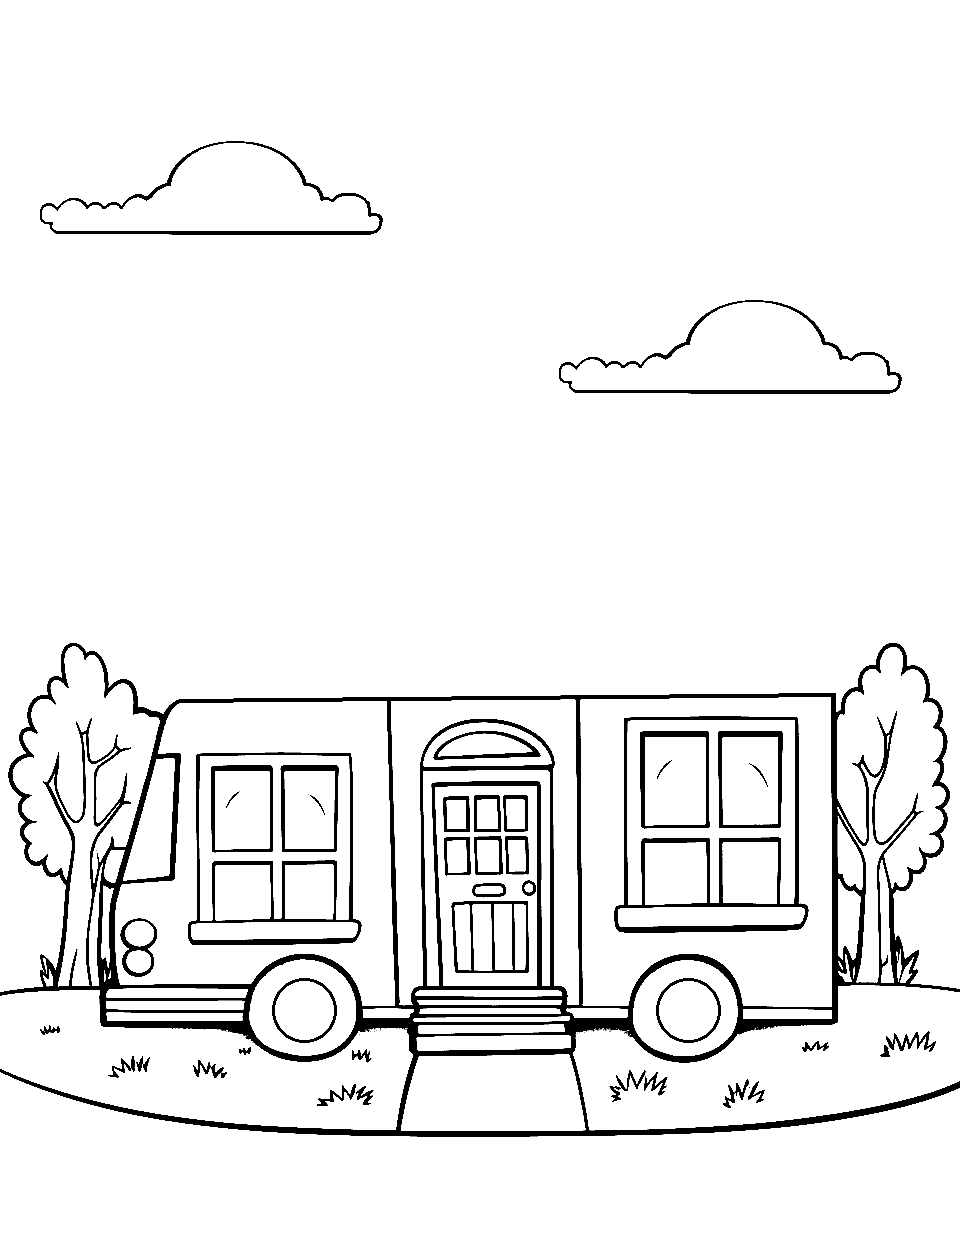 School Bus Abode Coloring Page - A house in the shape of a school bus.